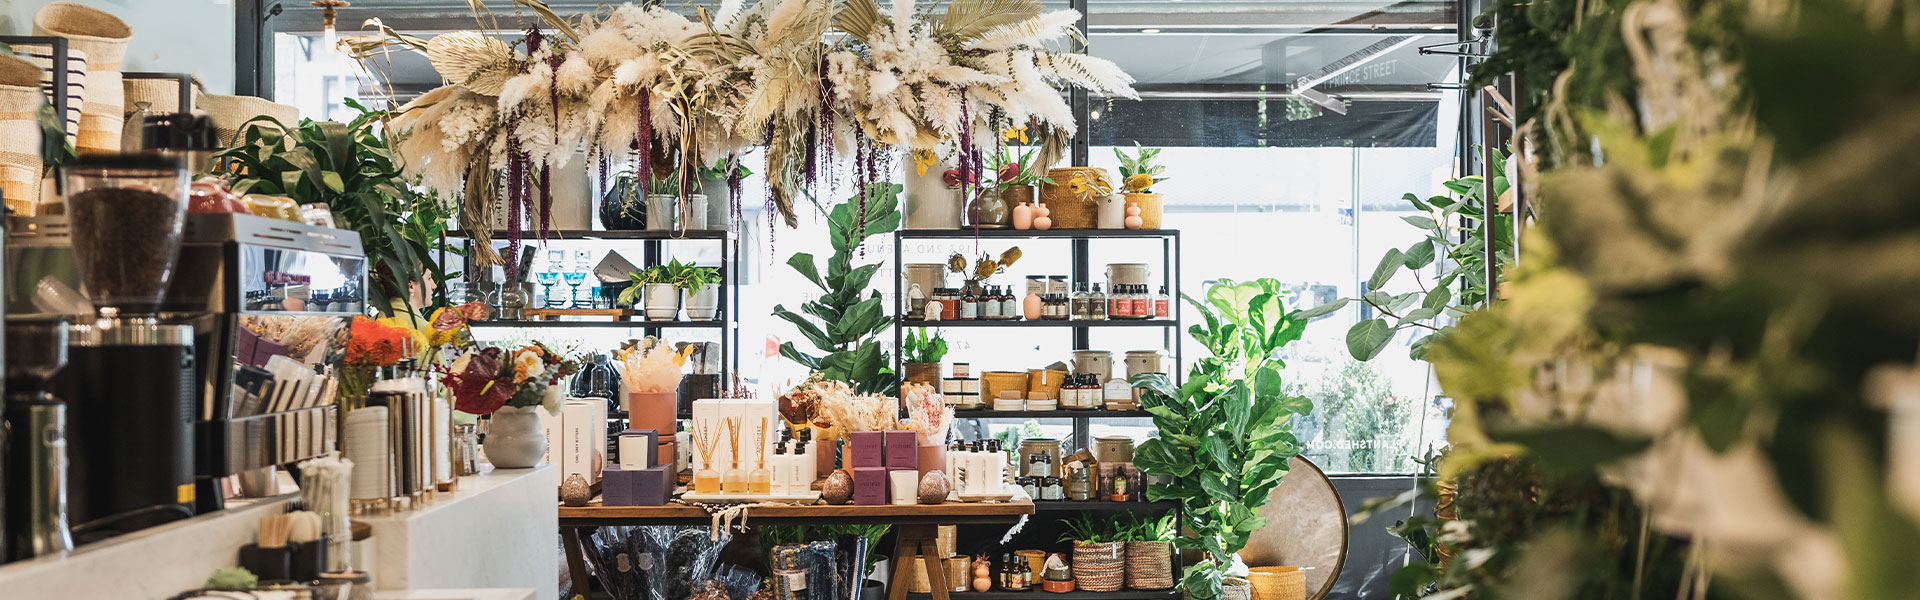 Plant Shed Prince Street location now open